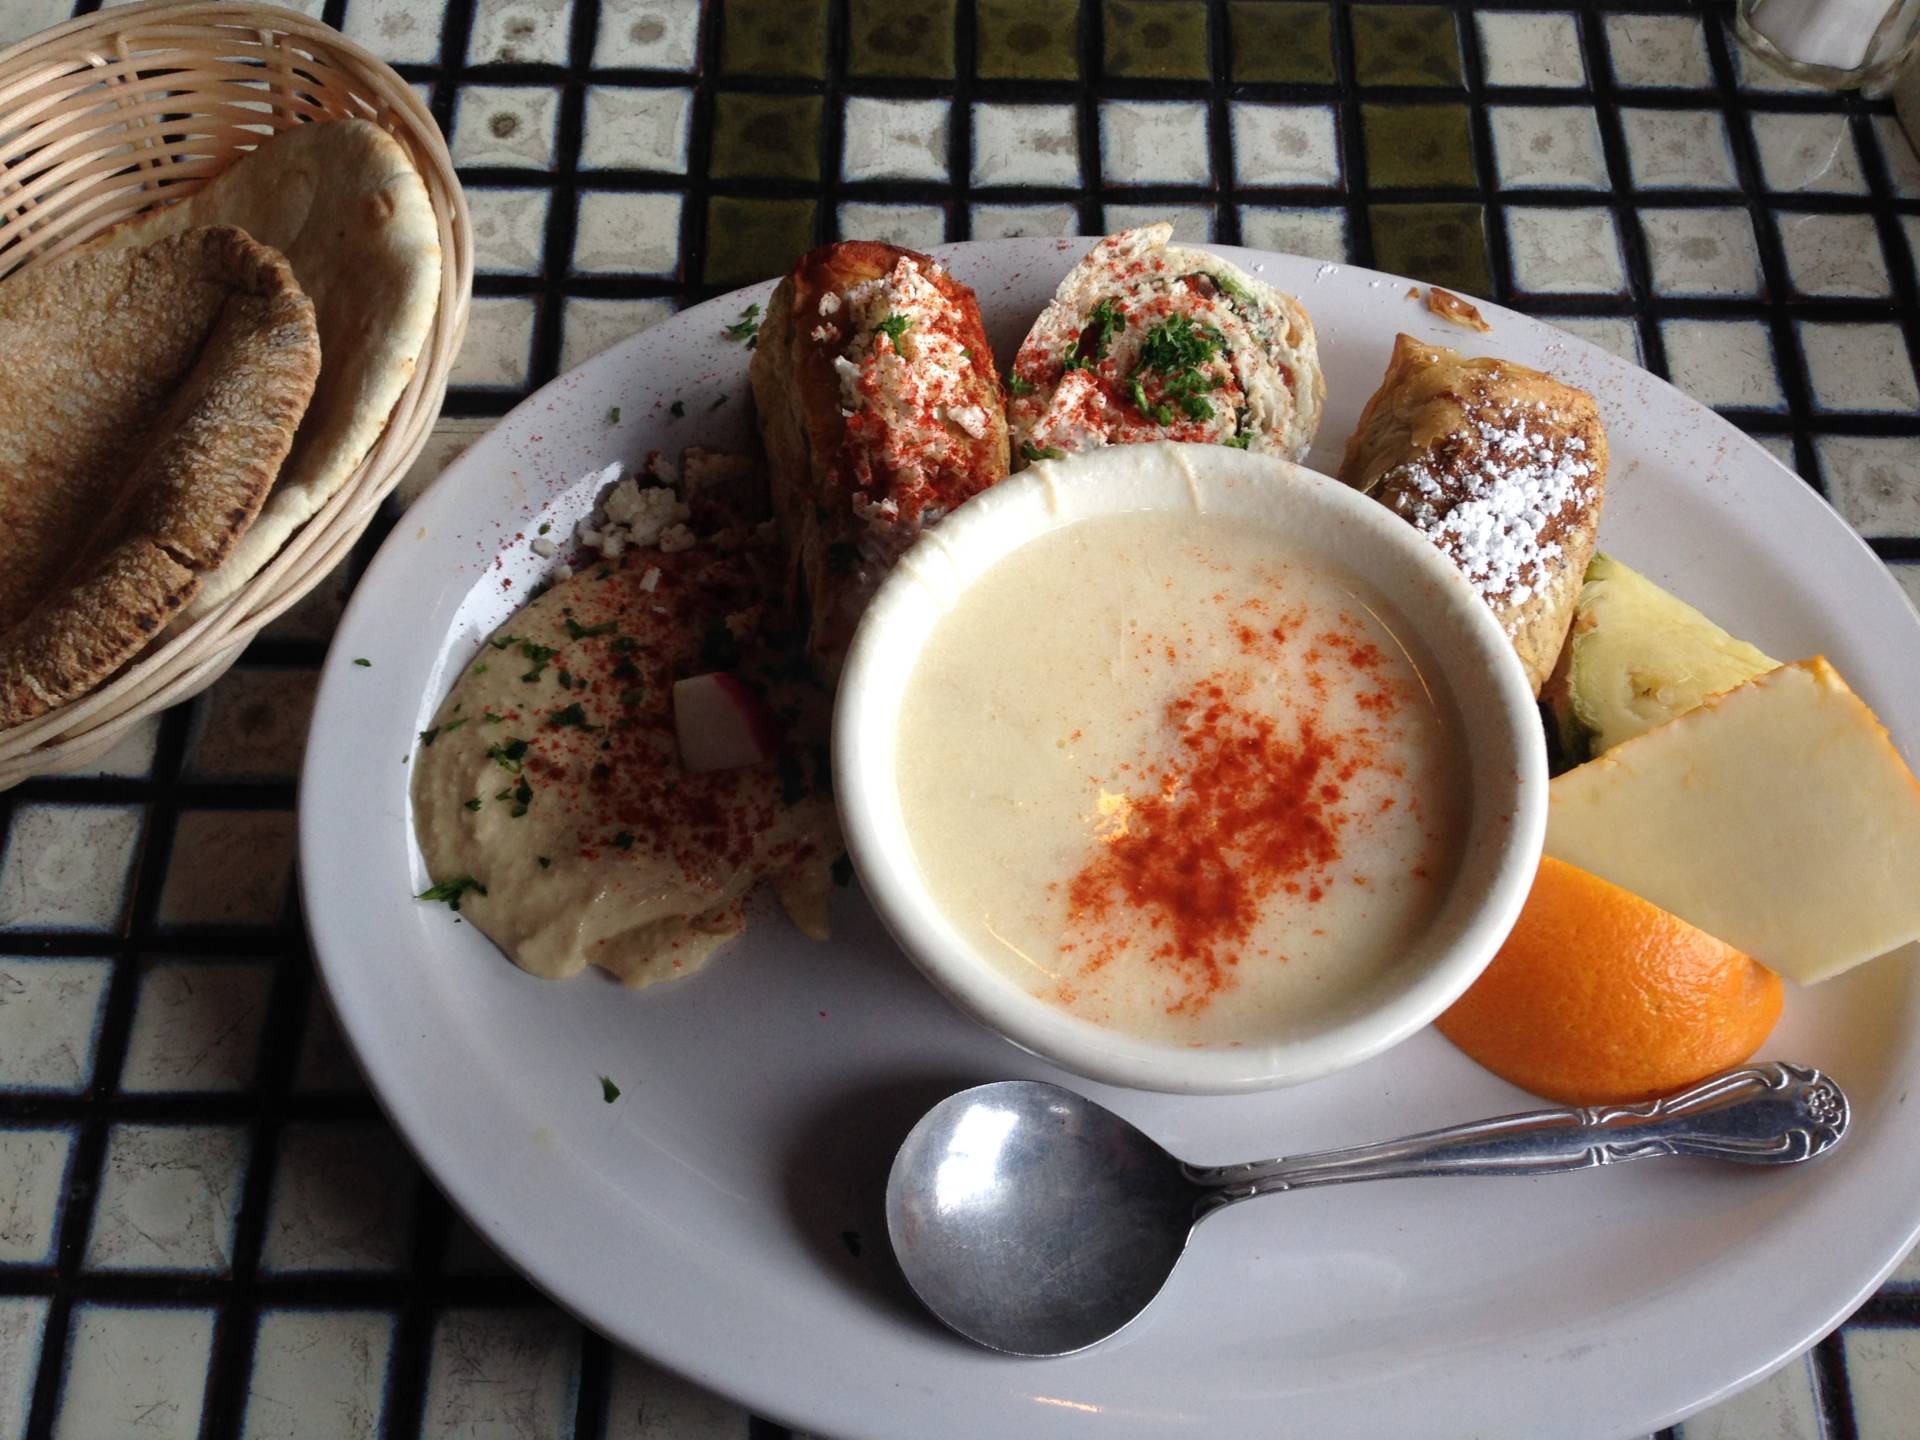 A lunch special Middle Eastern Plate from La Mediterranée.